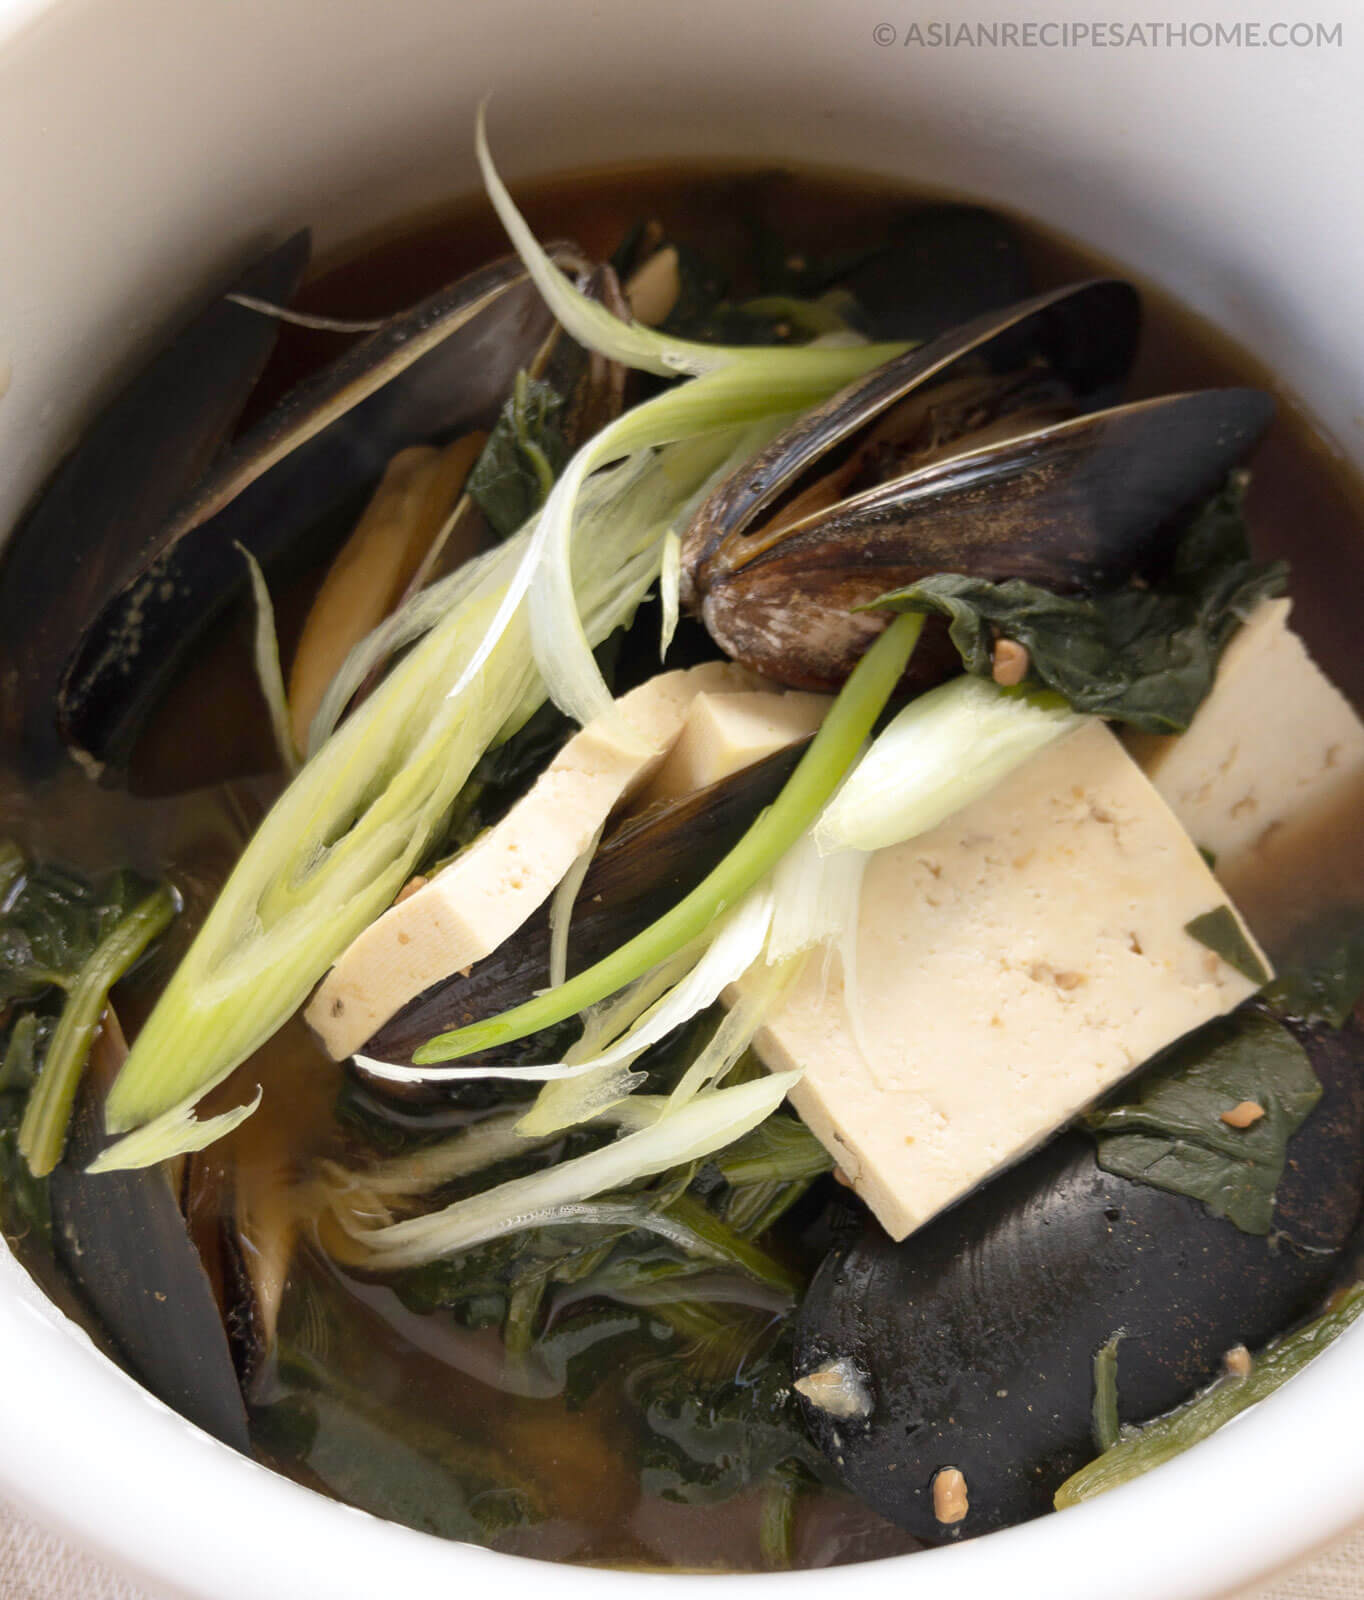 This Korean spinach and mussel fermented soybean (doenjang) soup is so easy to make and will make you feel good about eating it. 